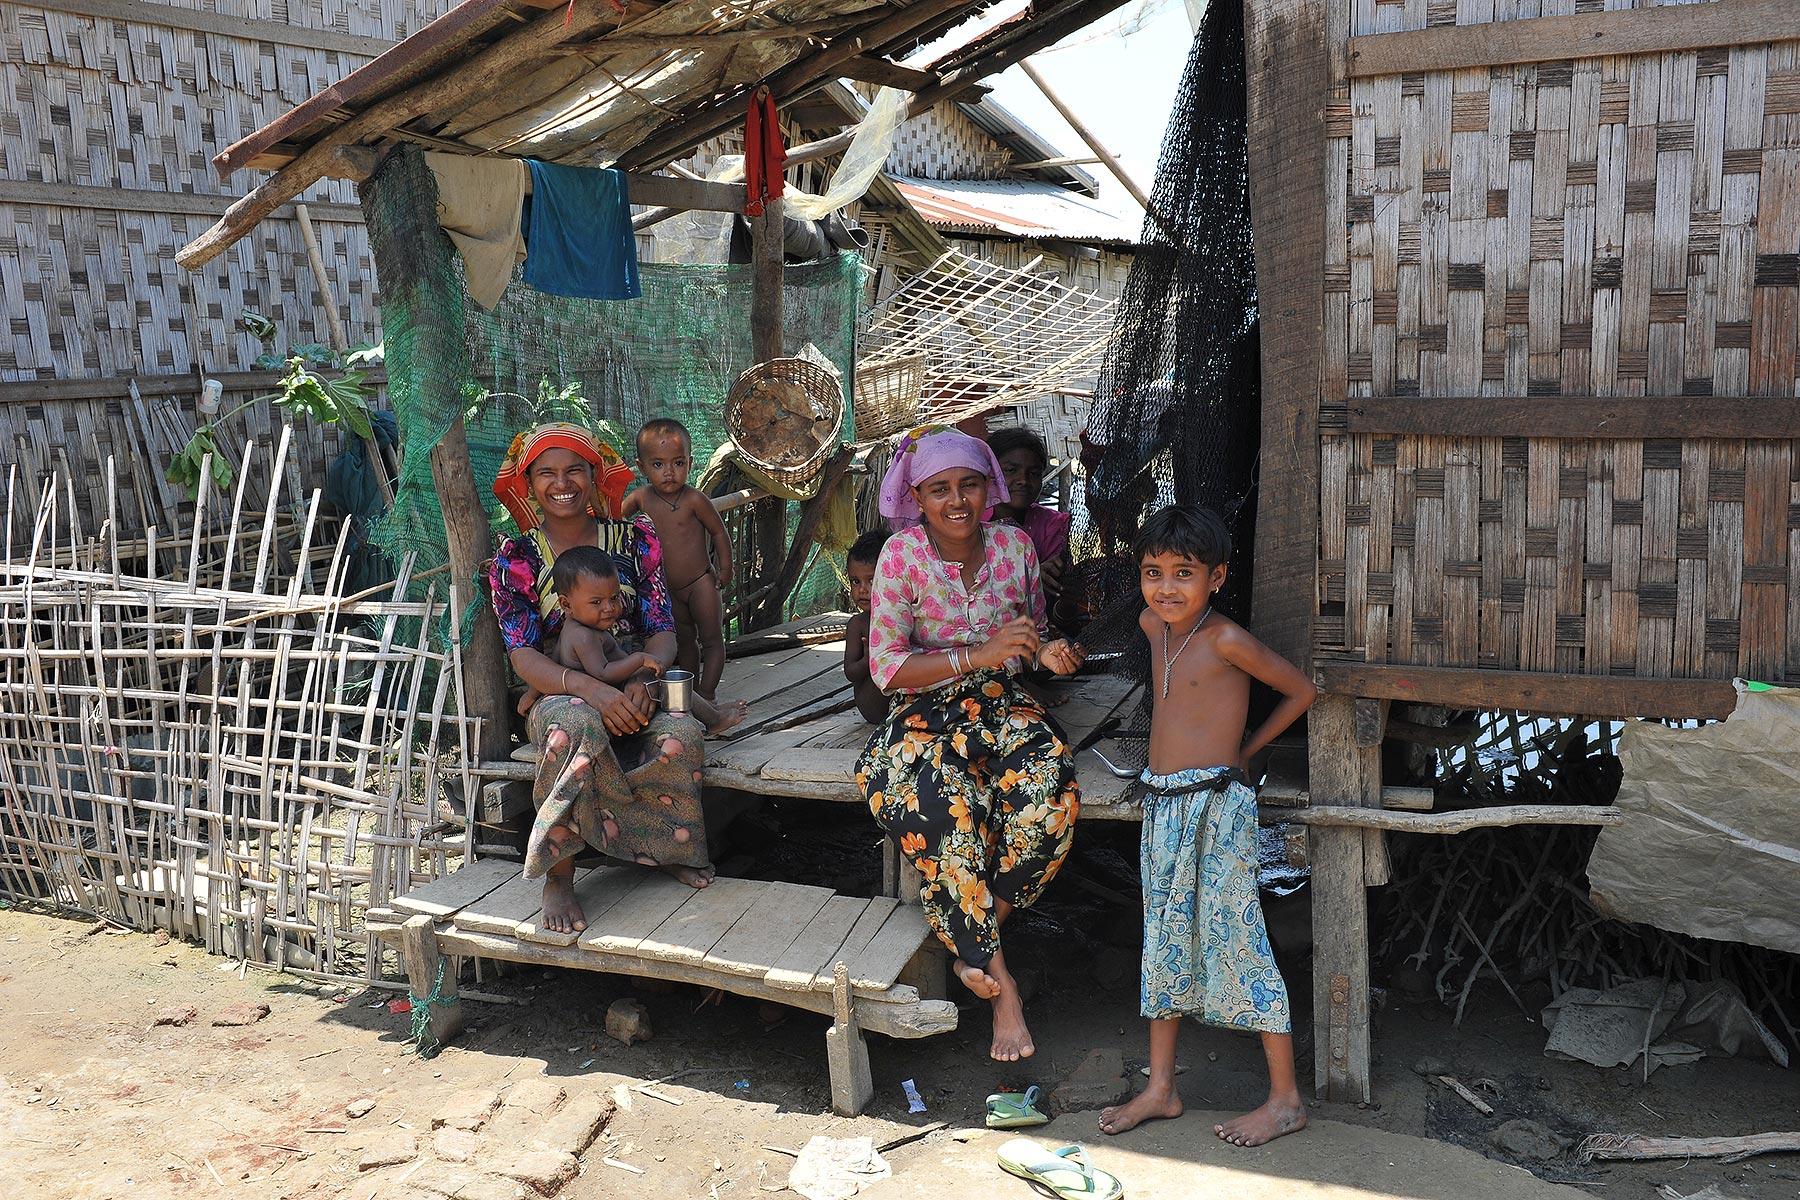 A Rohingya family in an IDP camp in Pauktaw, near Sittwe. LWF, among others, runs informal learning spaces and trains teachers to provide education for the displaced children. Photo: LWF/ C. KÃ¤stner